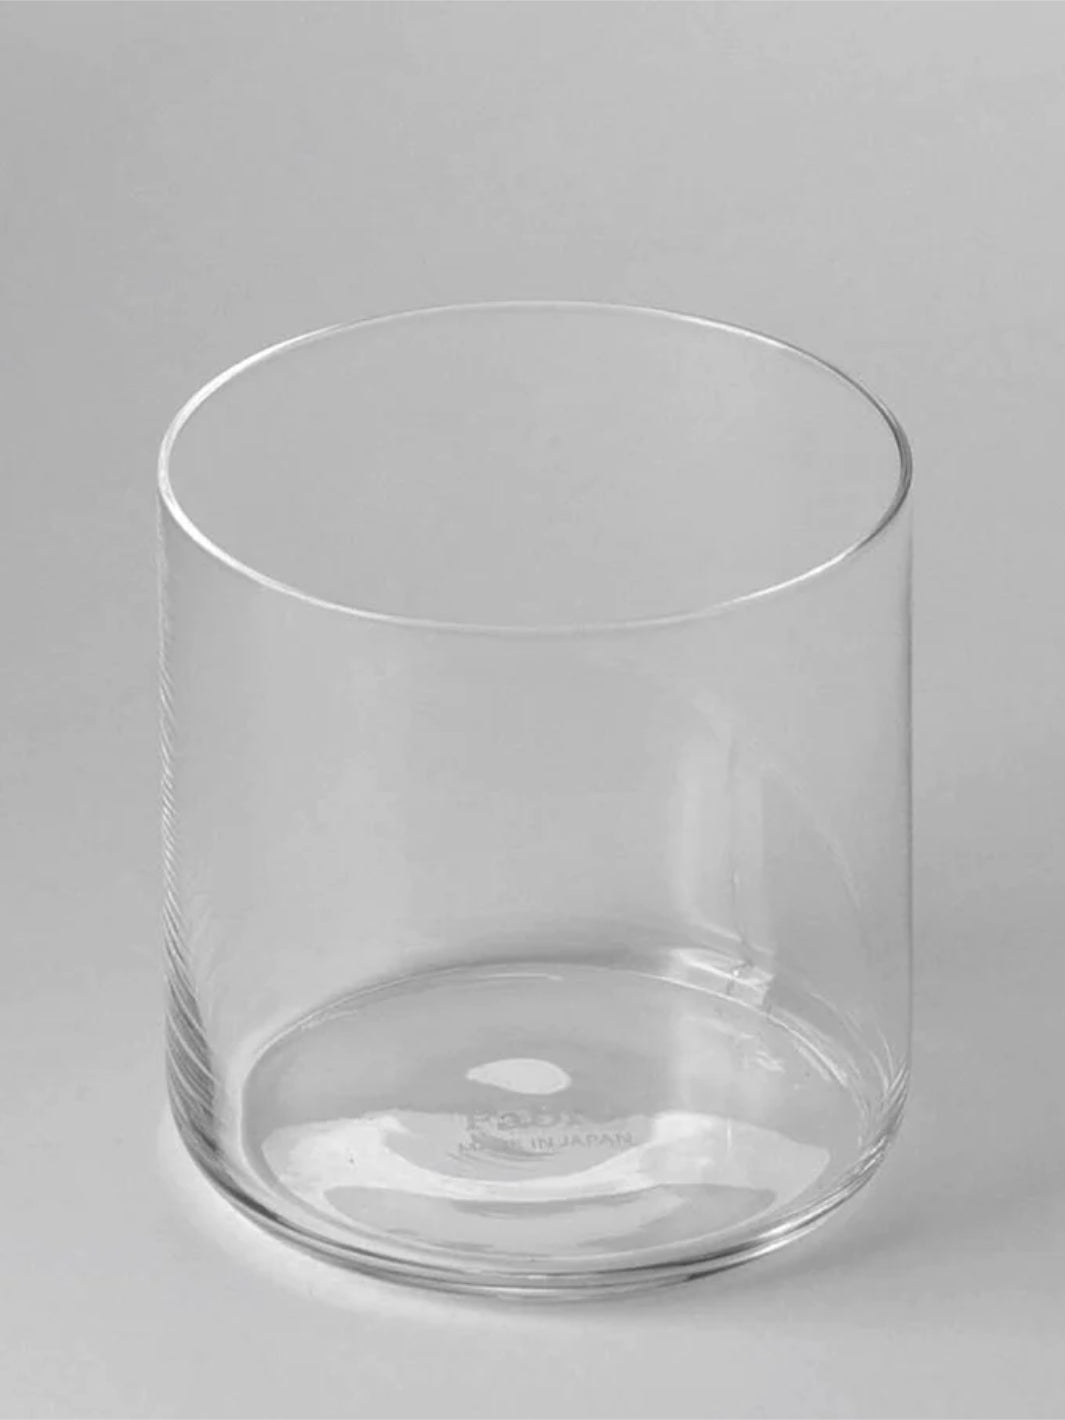 FABLE The Short Glasses (4-Pack)